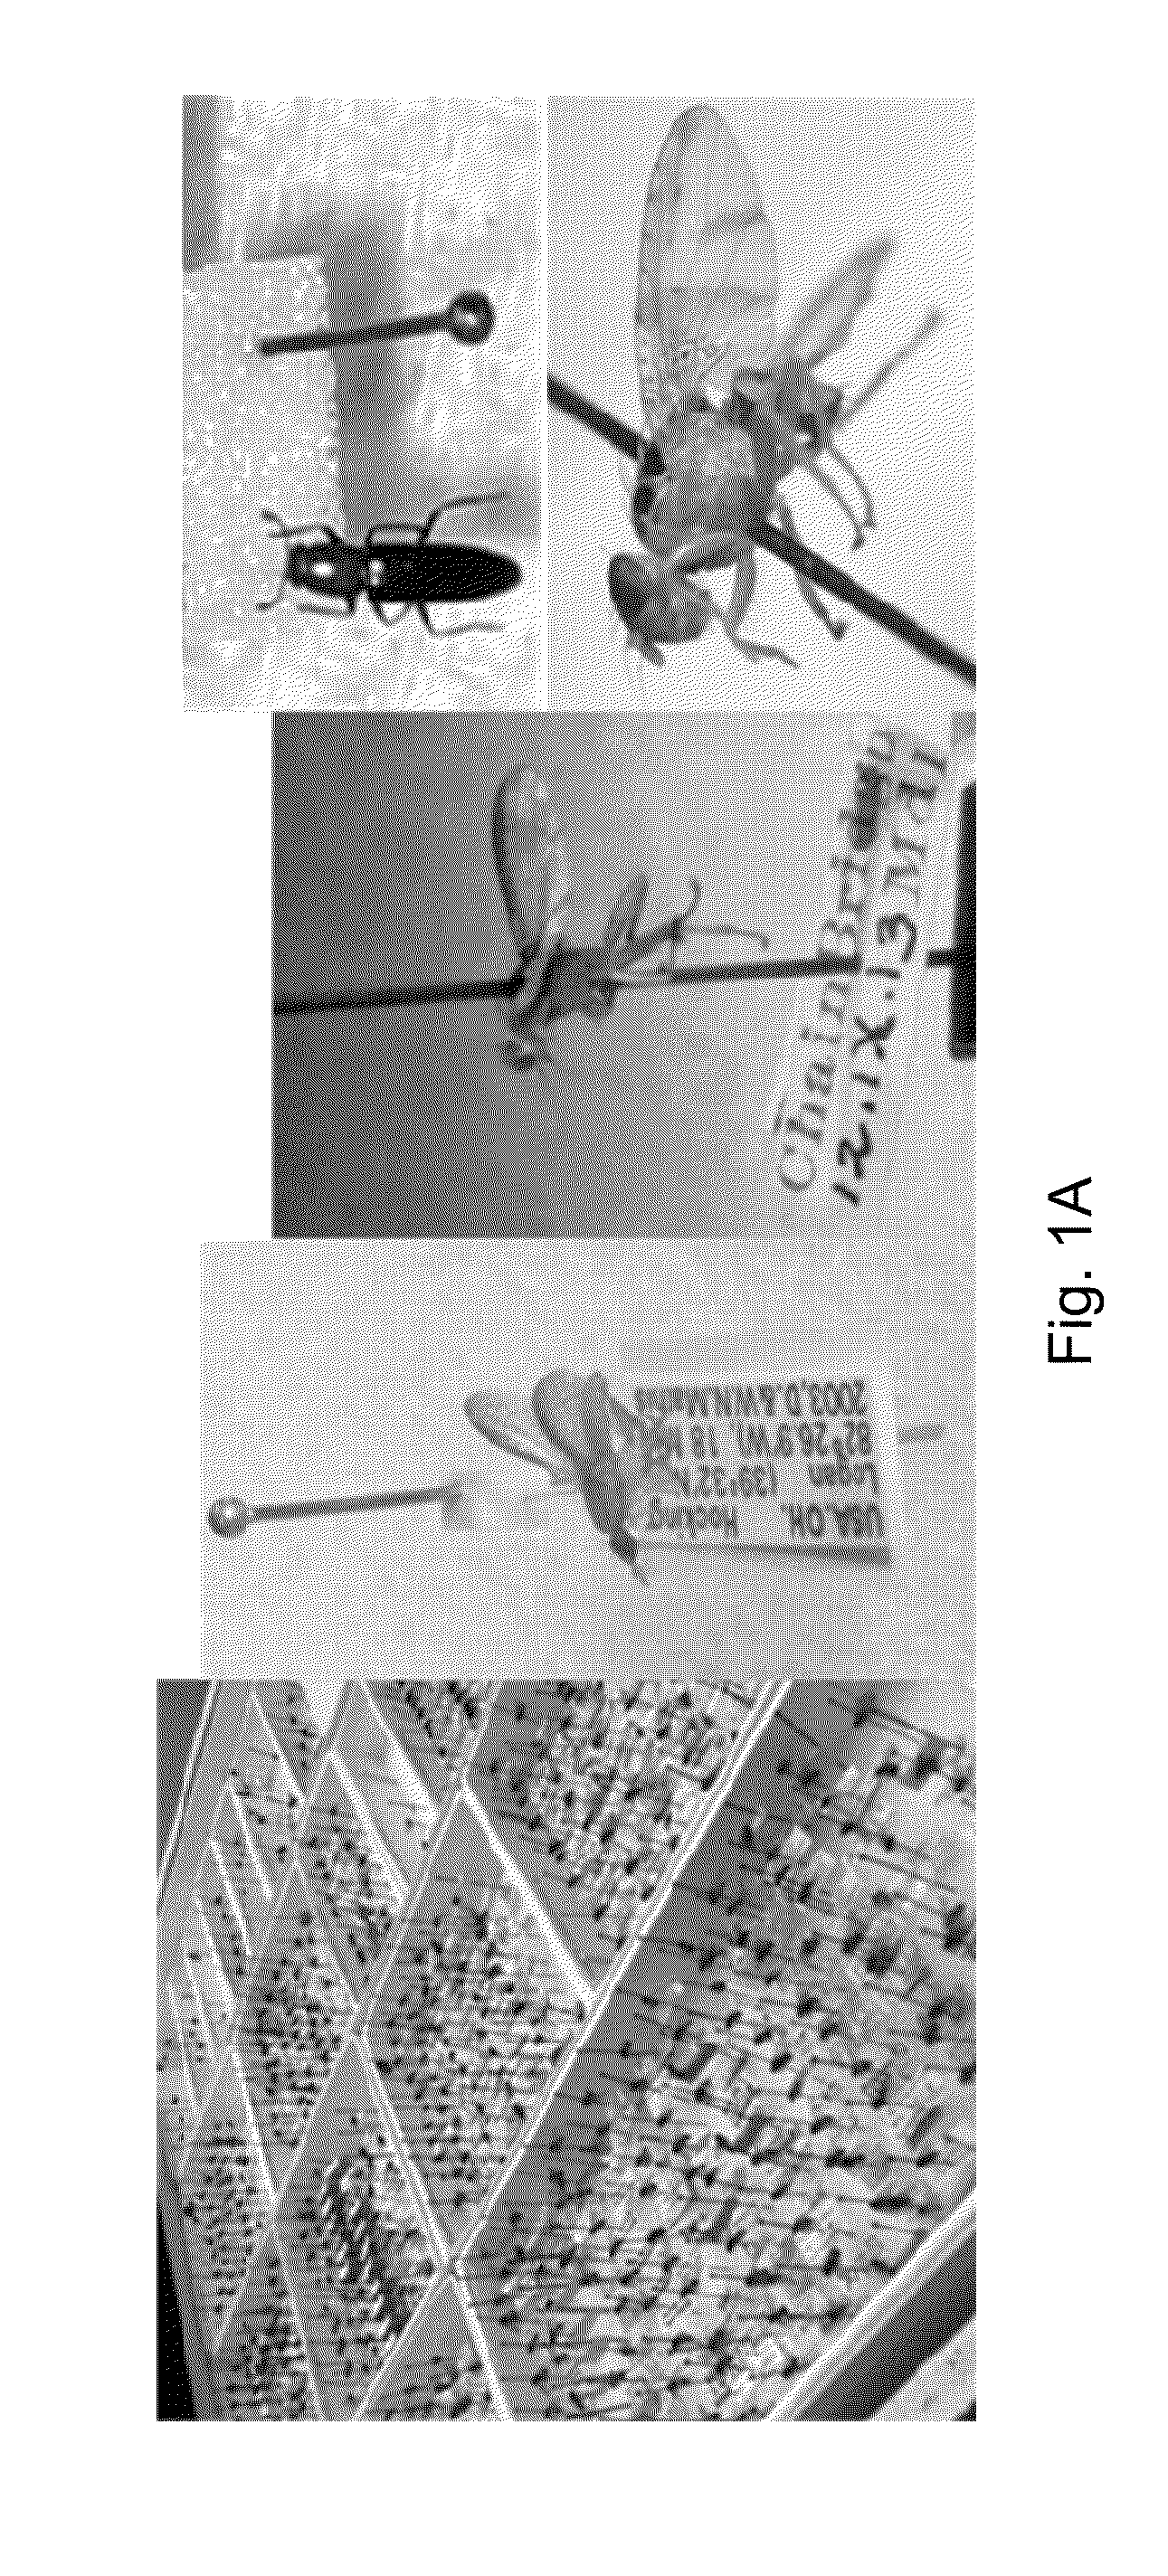 System and method for adaptively conformed imaging of work pieces having disparate configuration